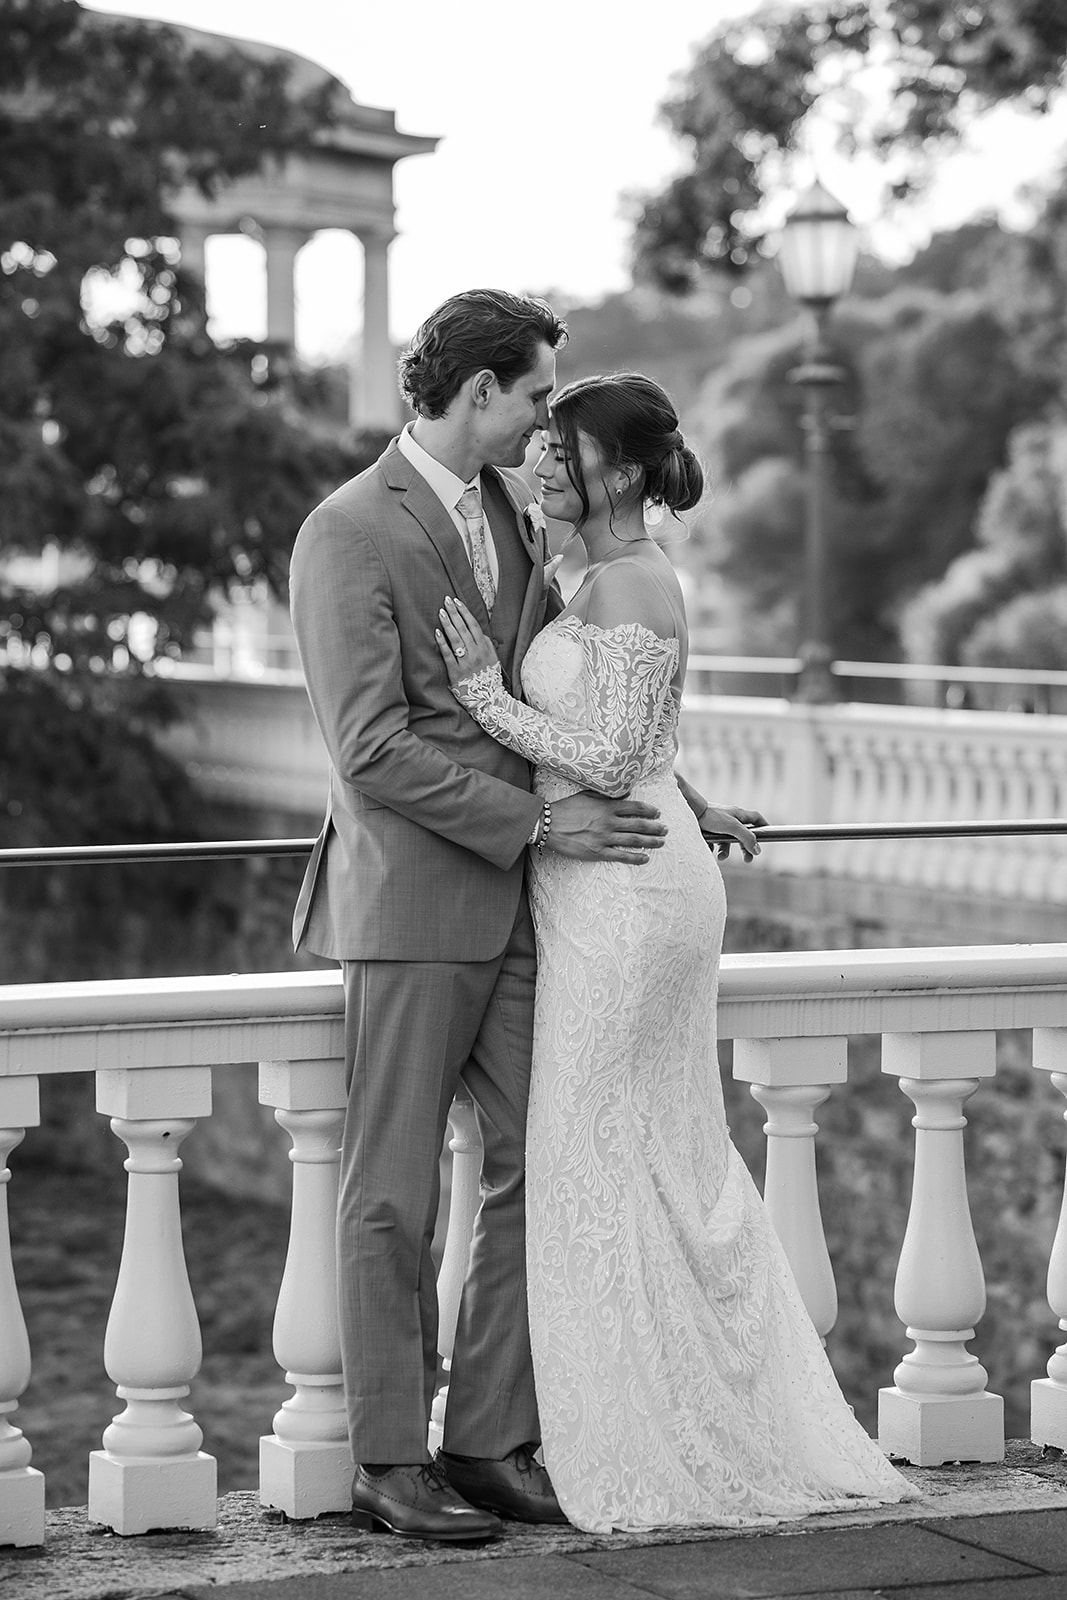 Balck and white modern wedding photography in Philly